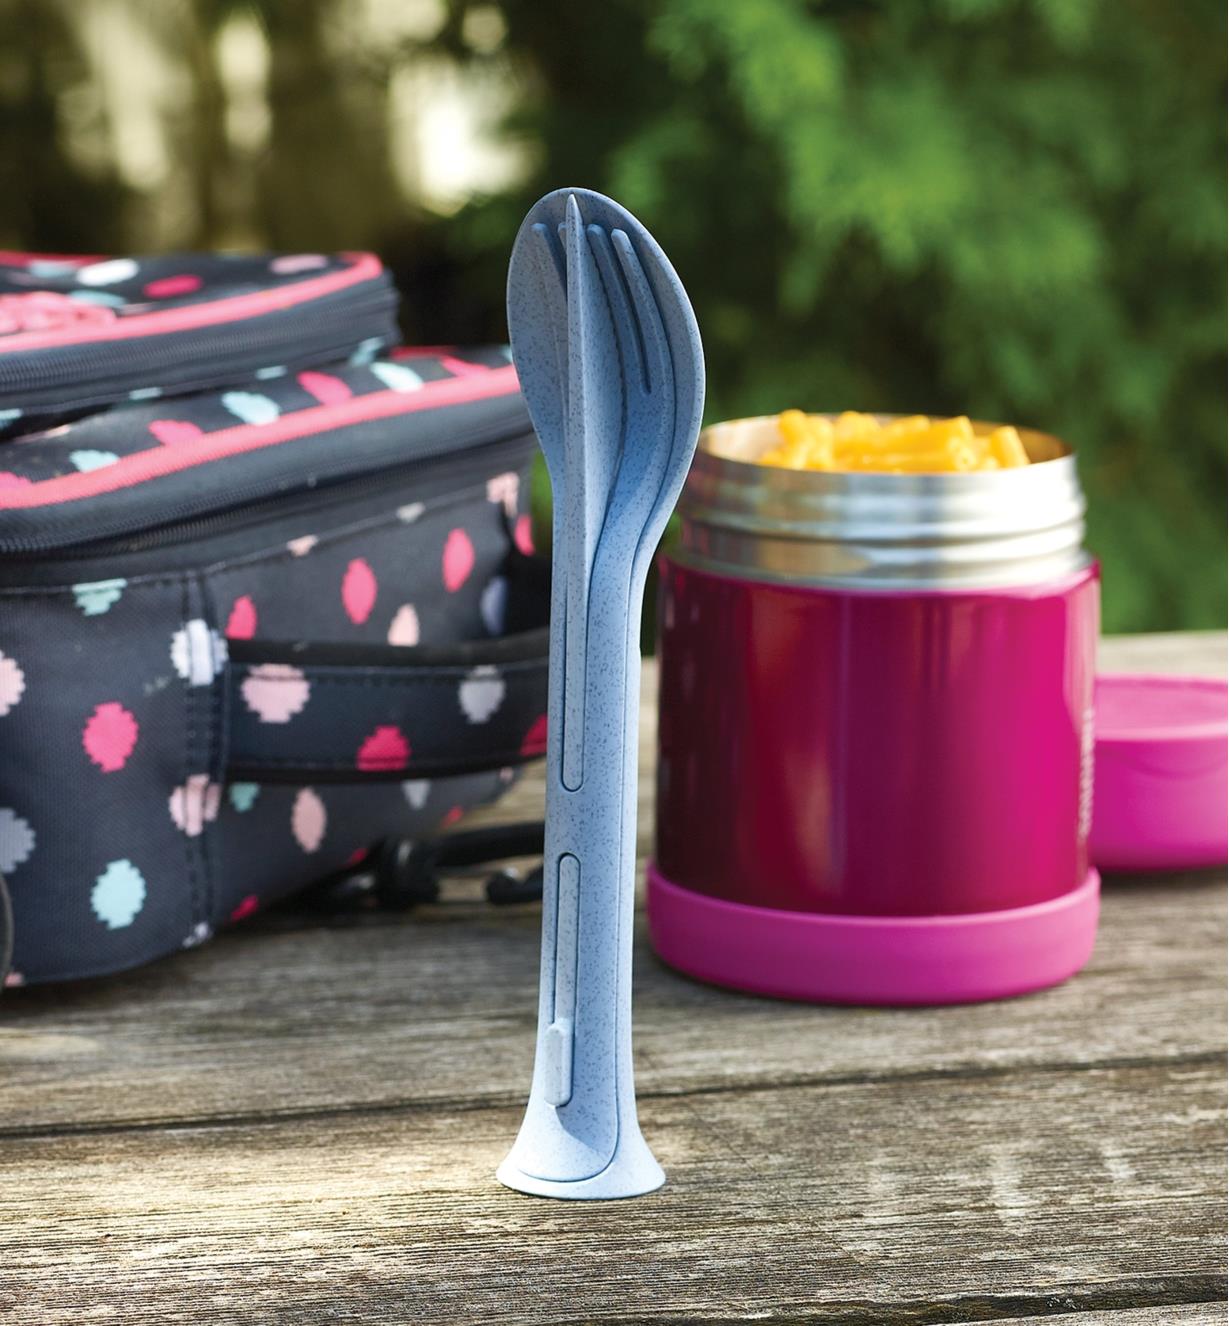 Blue Klikk small cutlery set standing on its end next to a thermos of macaroni and cheese